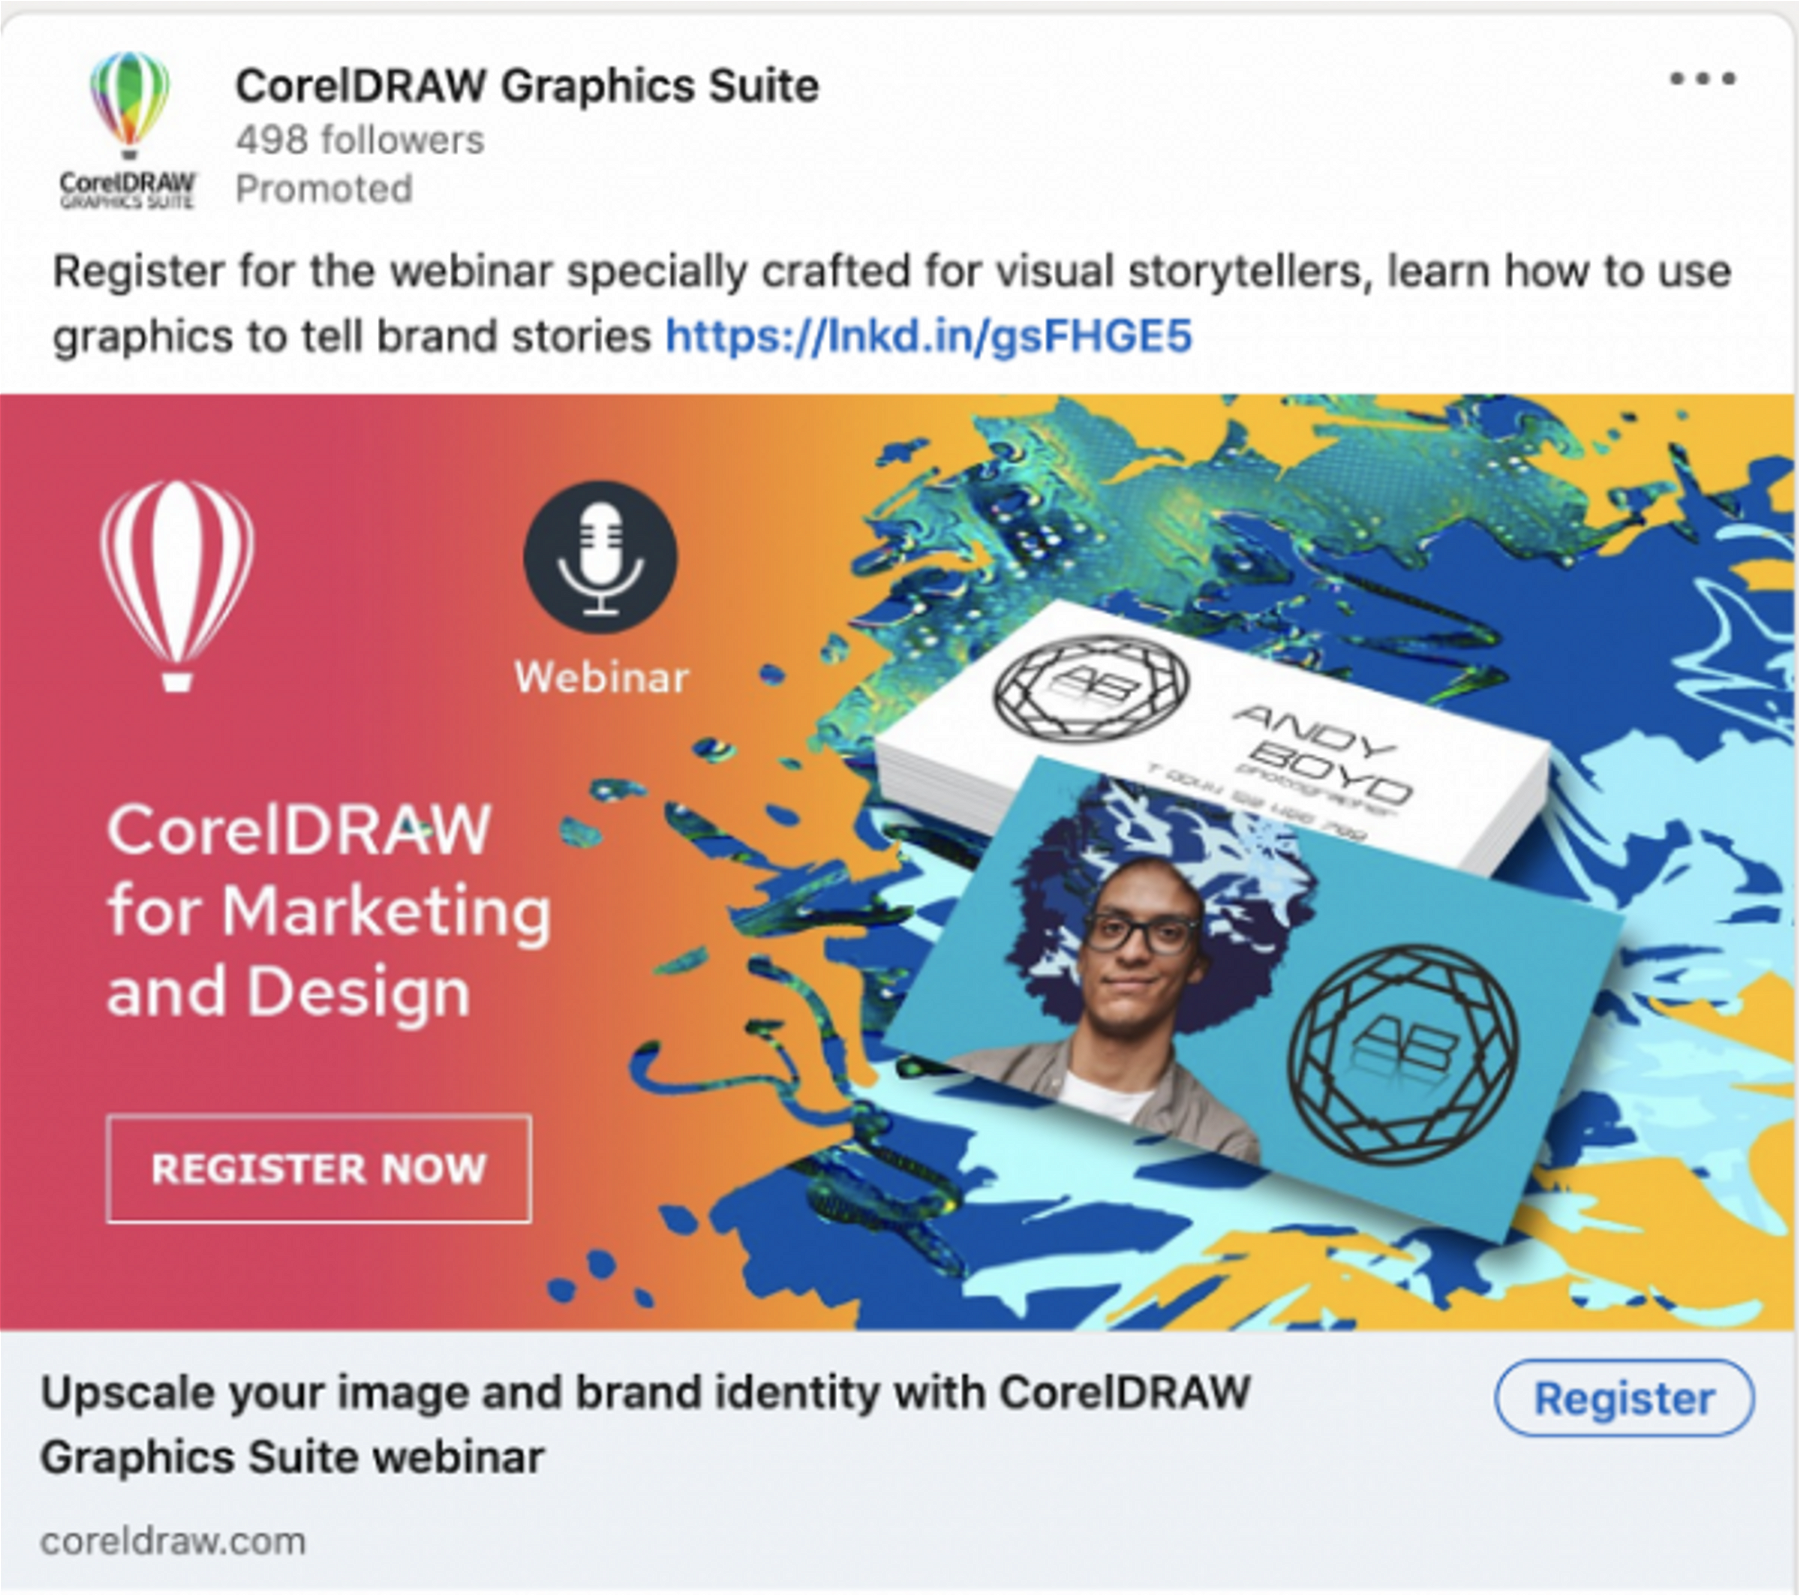 CorelDRAW uses engaging designs and lead gen forms to attract webinar leads.